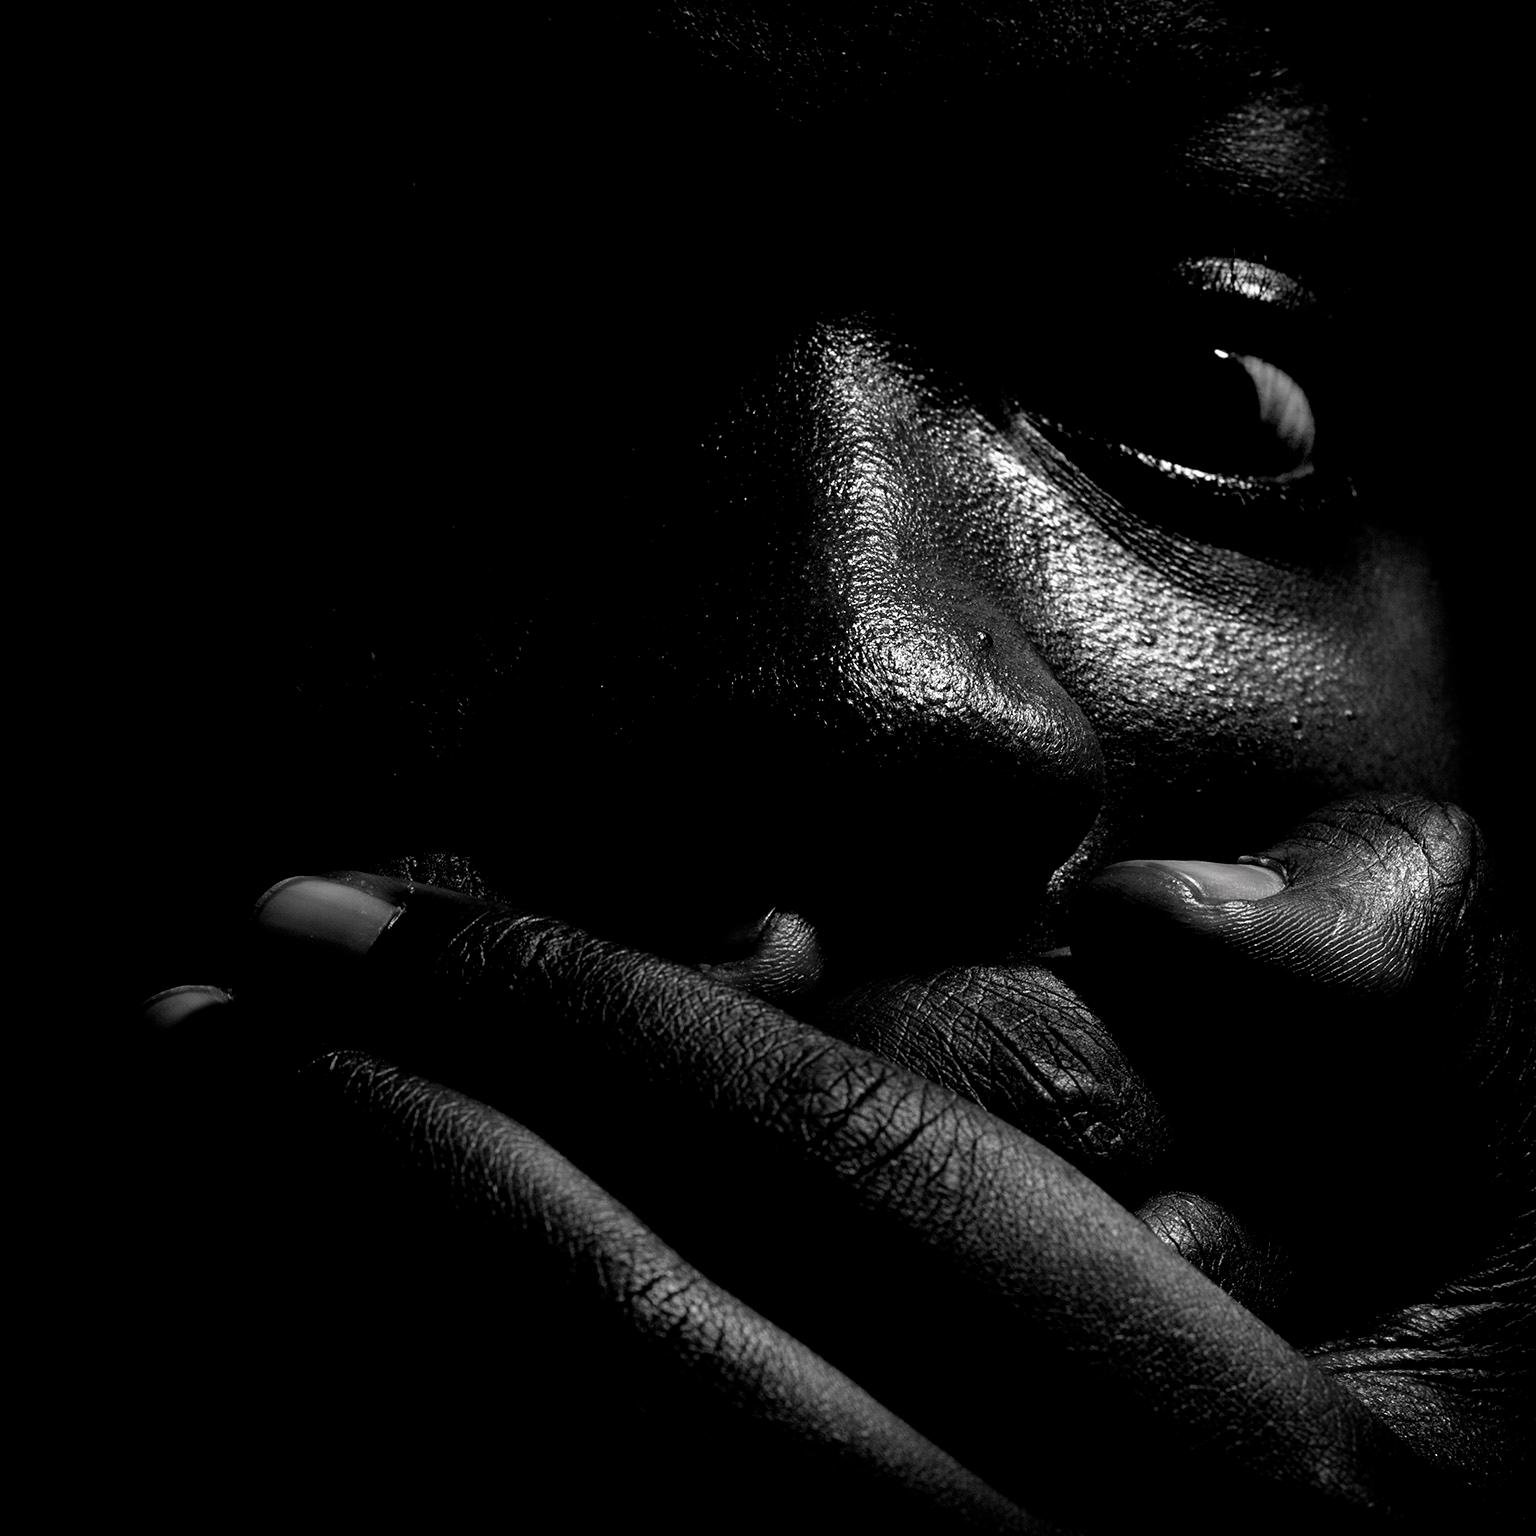 Jean-Luc Fievet Black and White Photograph - Untitled # 1 1 - 2008 - Expressionist Full Face Black and White Portrait of Man